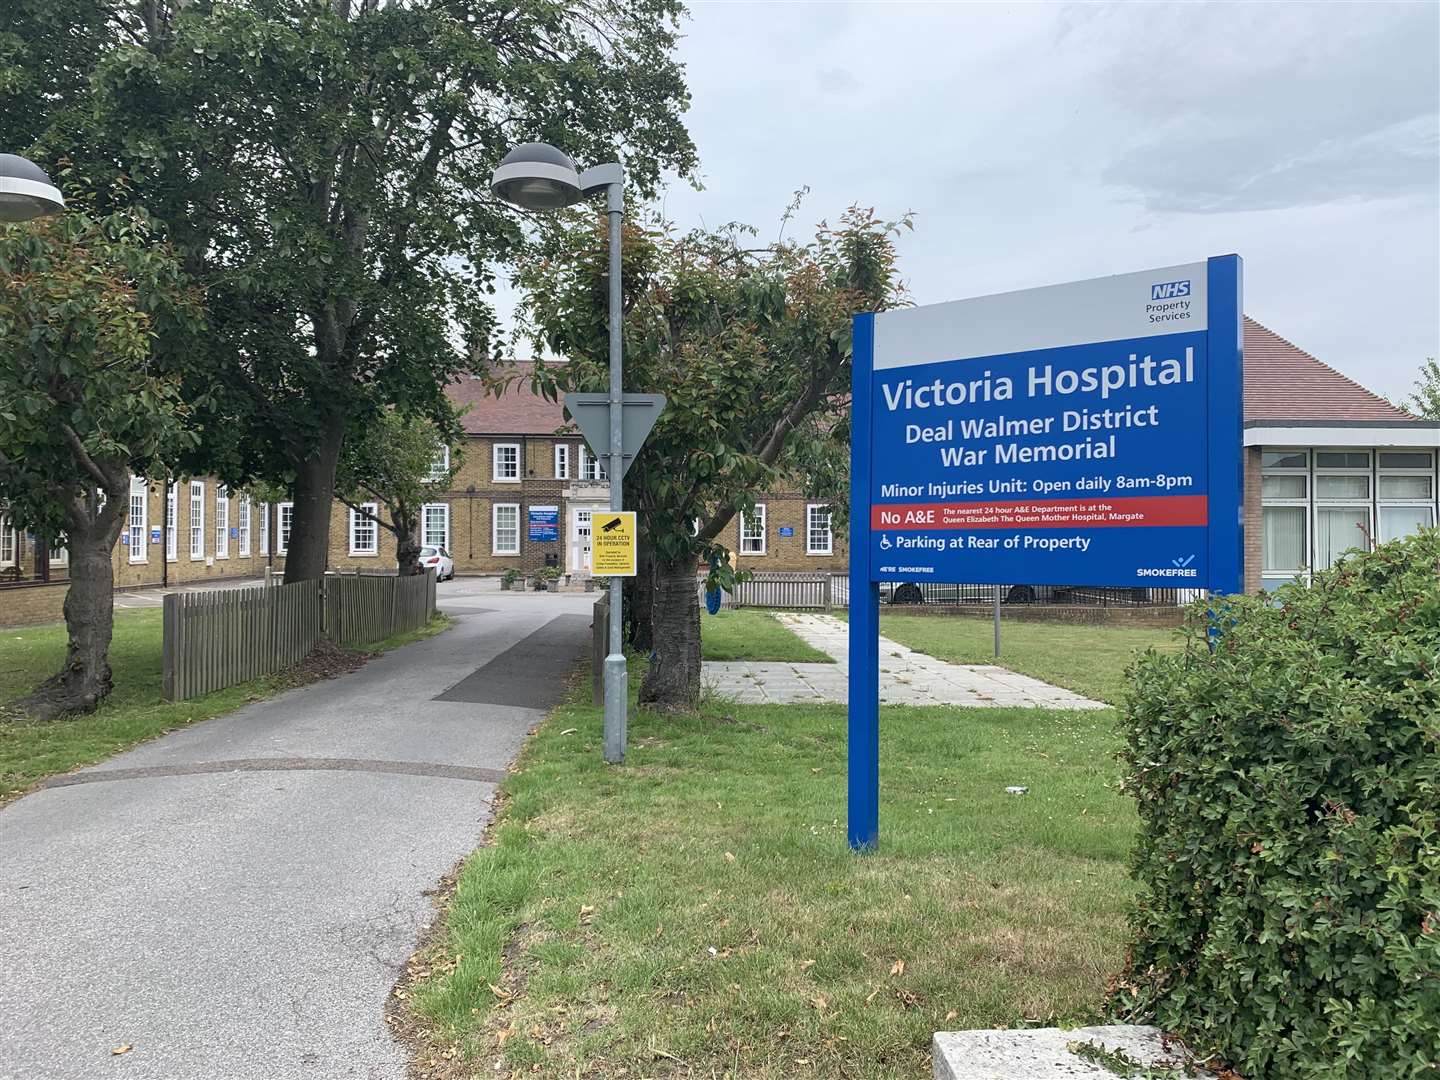 Blood tests are no longer being carried out at Deal Hospital